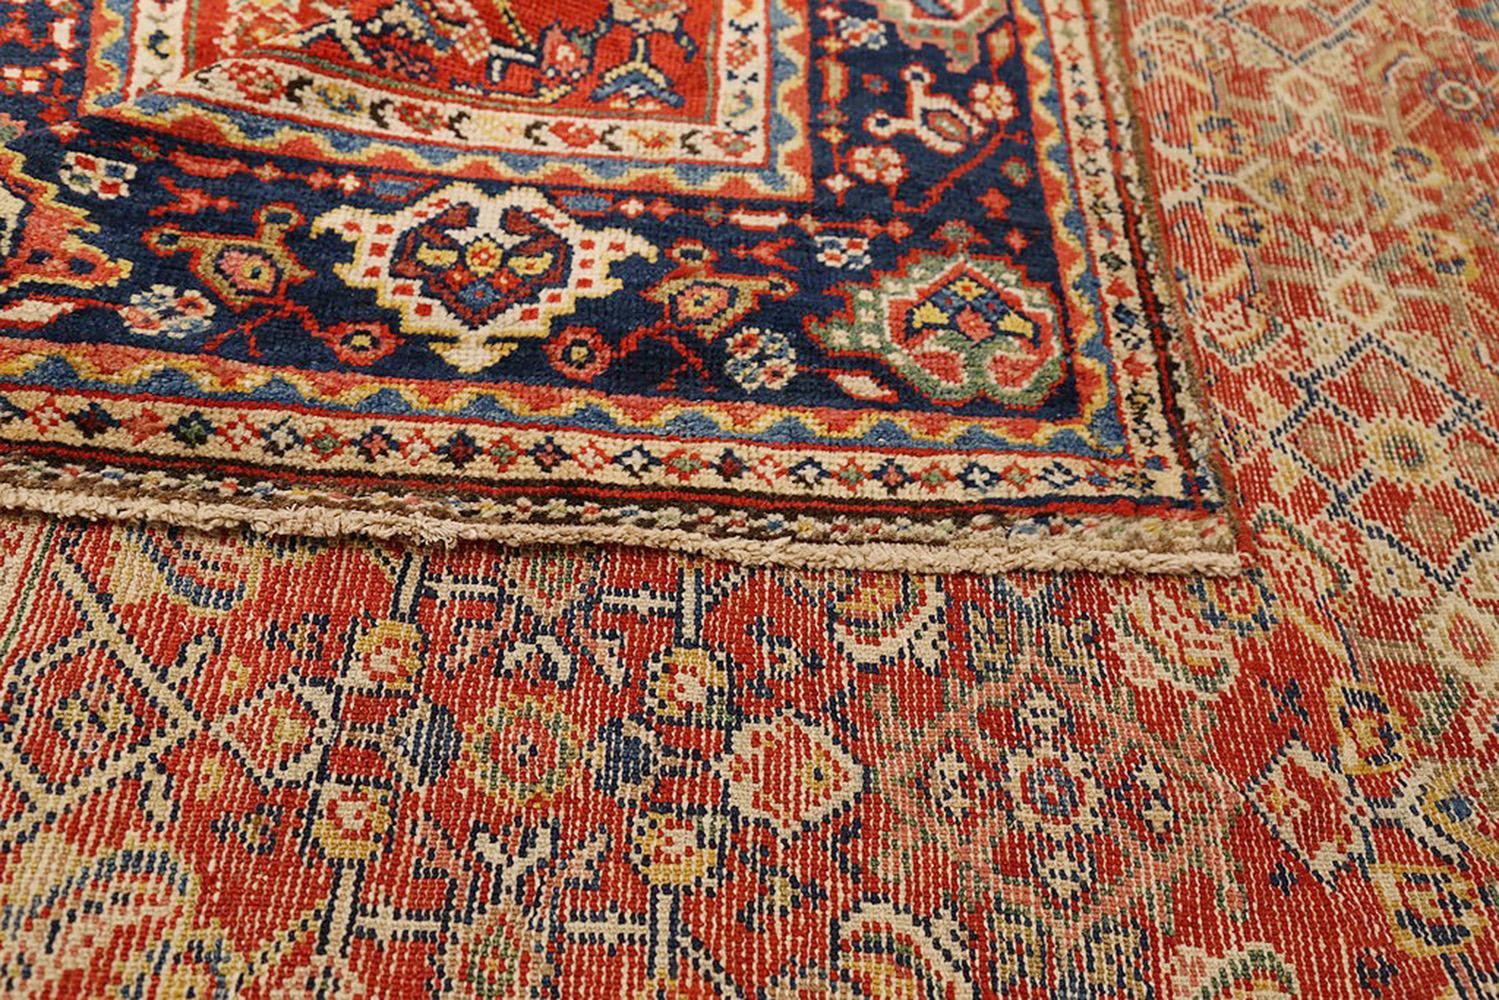 Antique Persian Sultanabad Rug with Green and Ivory Floral Motif on Red Field In Excellent Condition For Sale In Dallas, TX